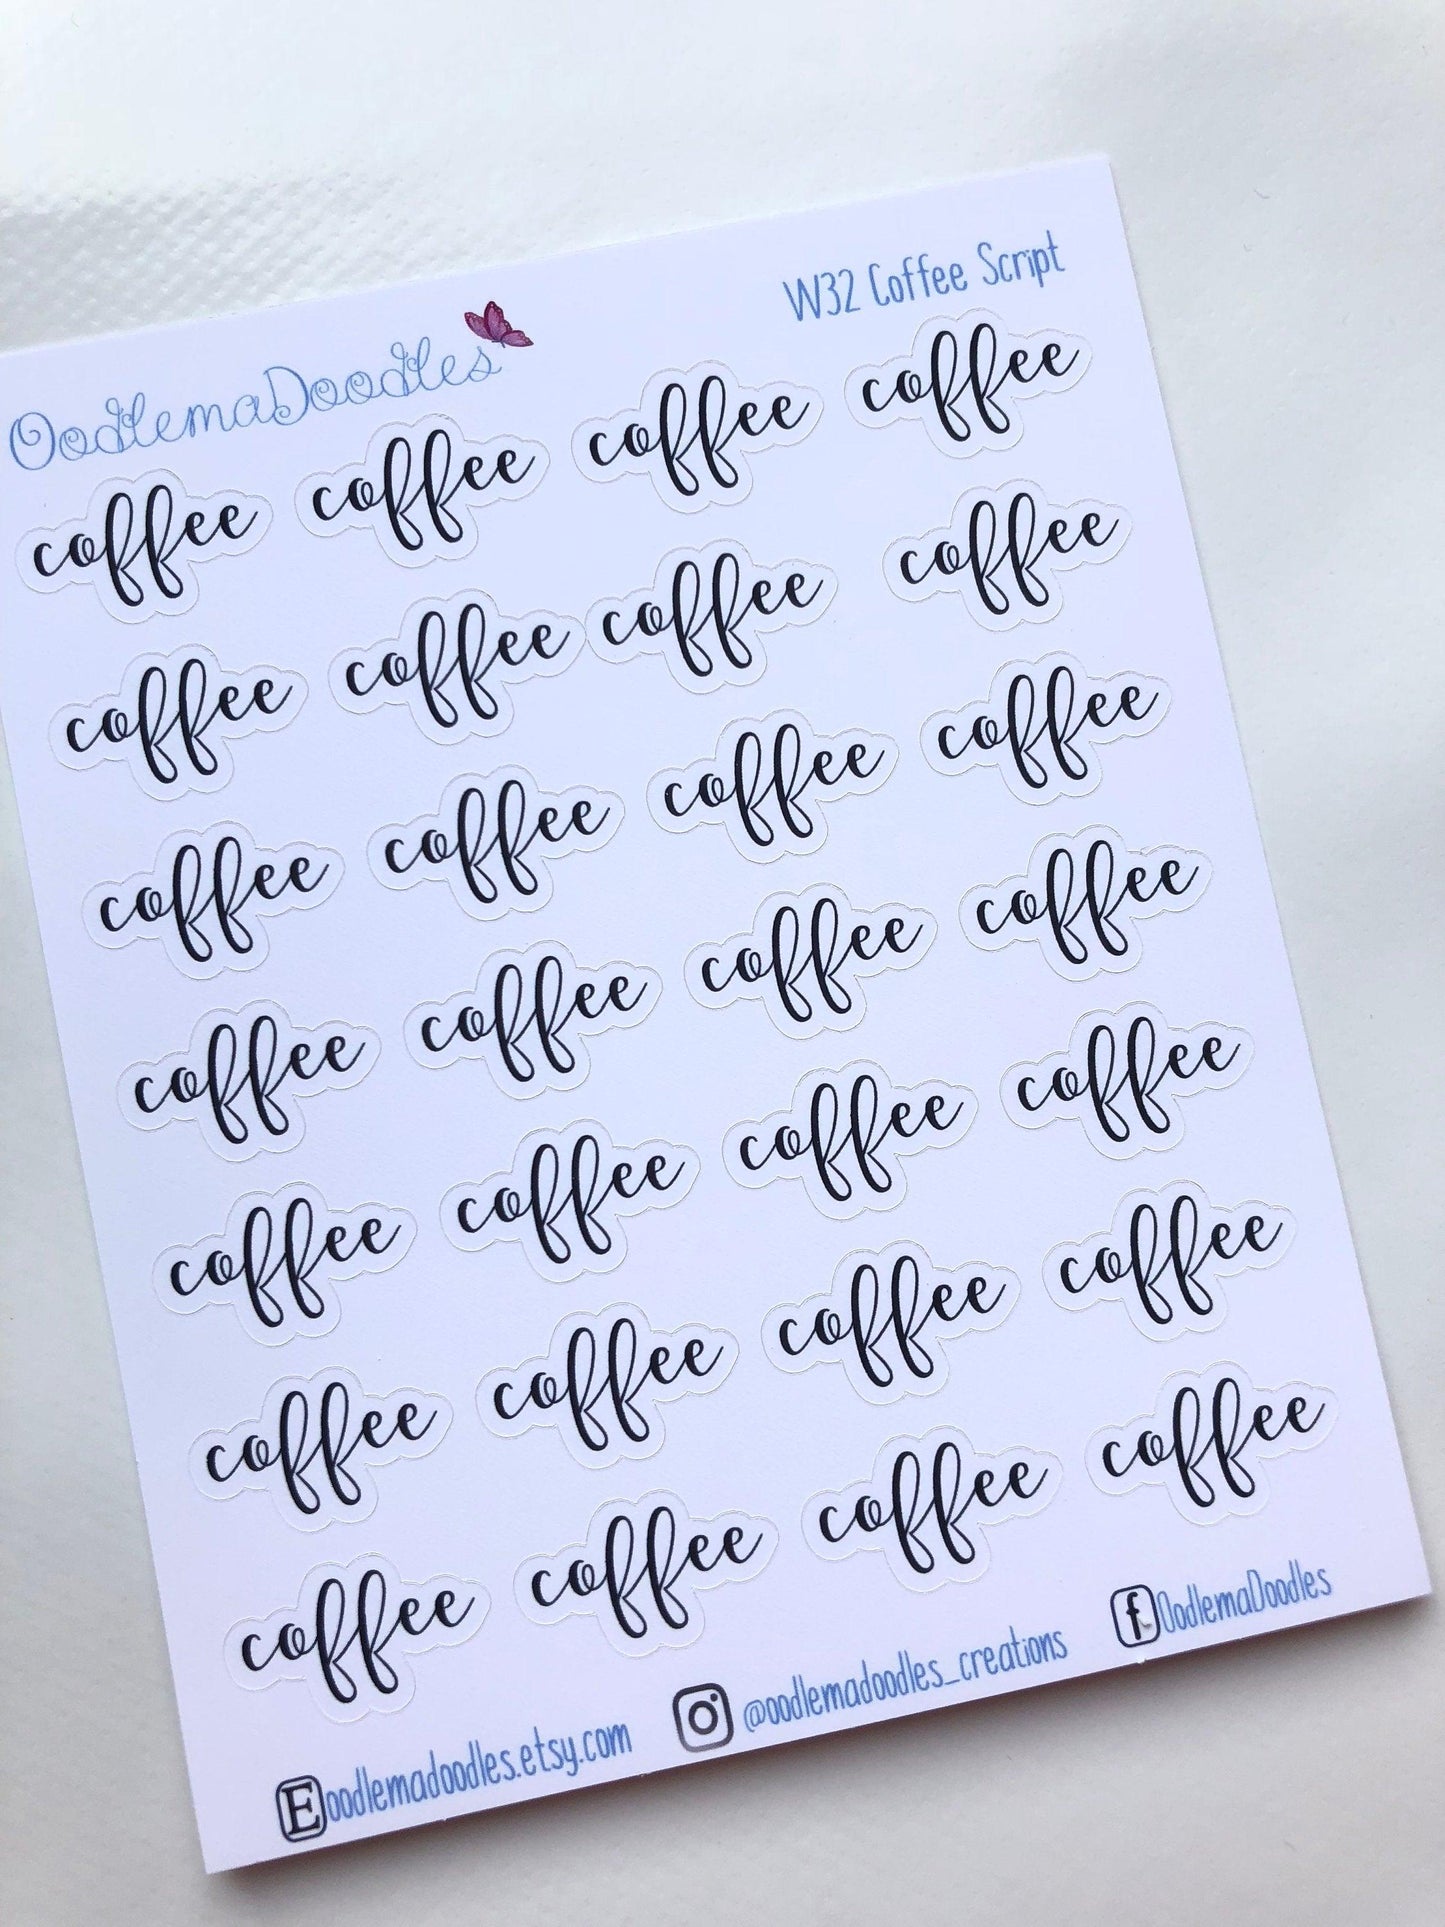 Coffee Script Stickers - oodlemadoodles